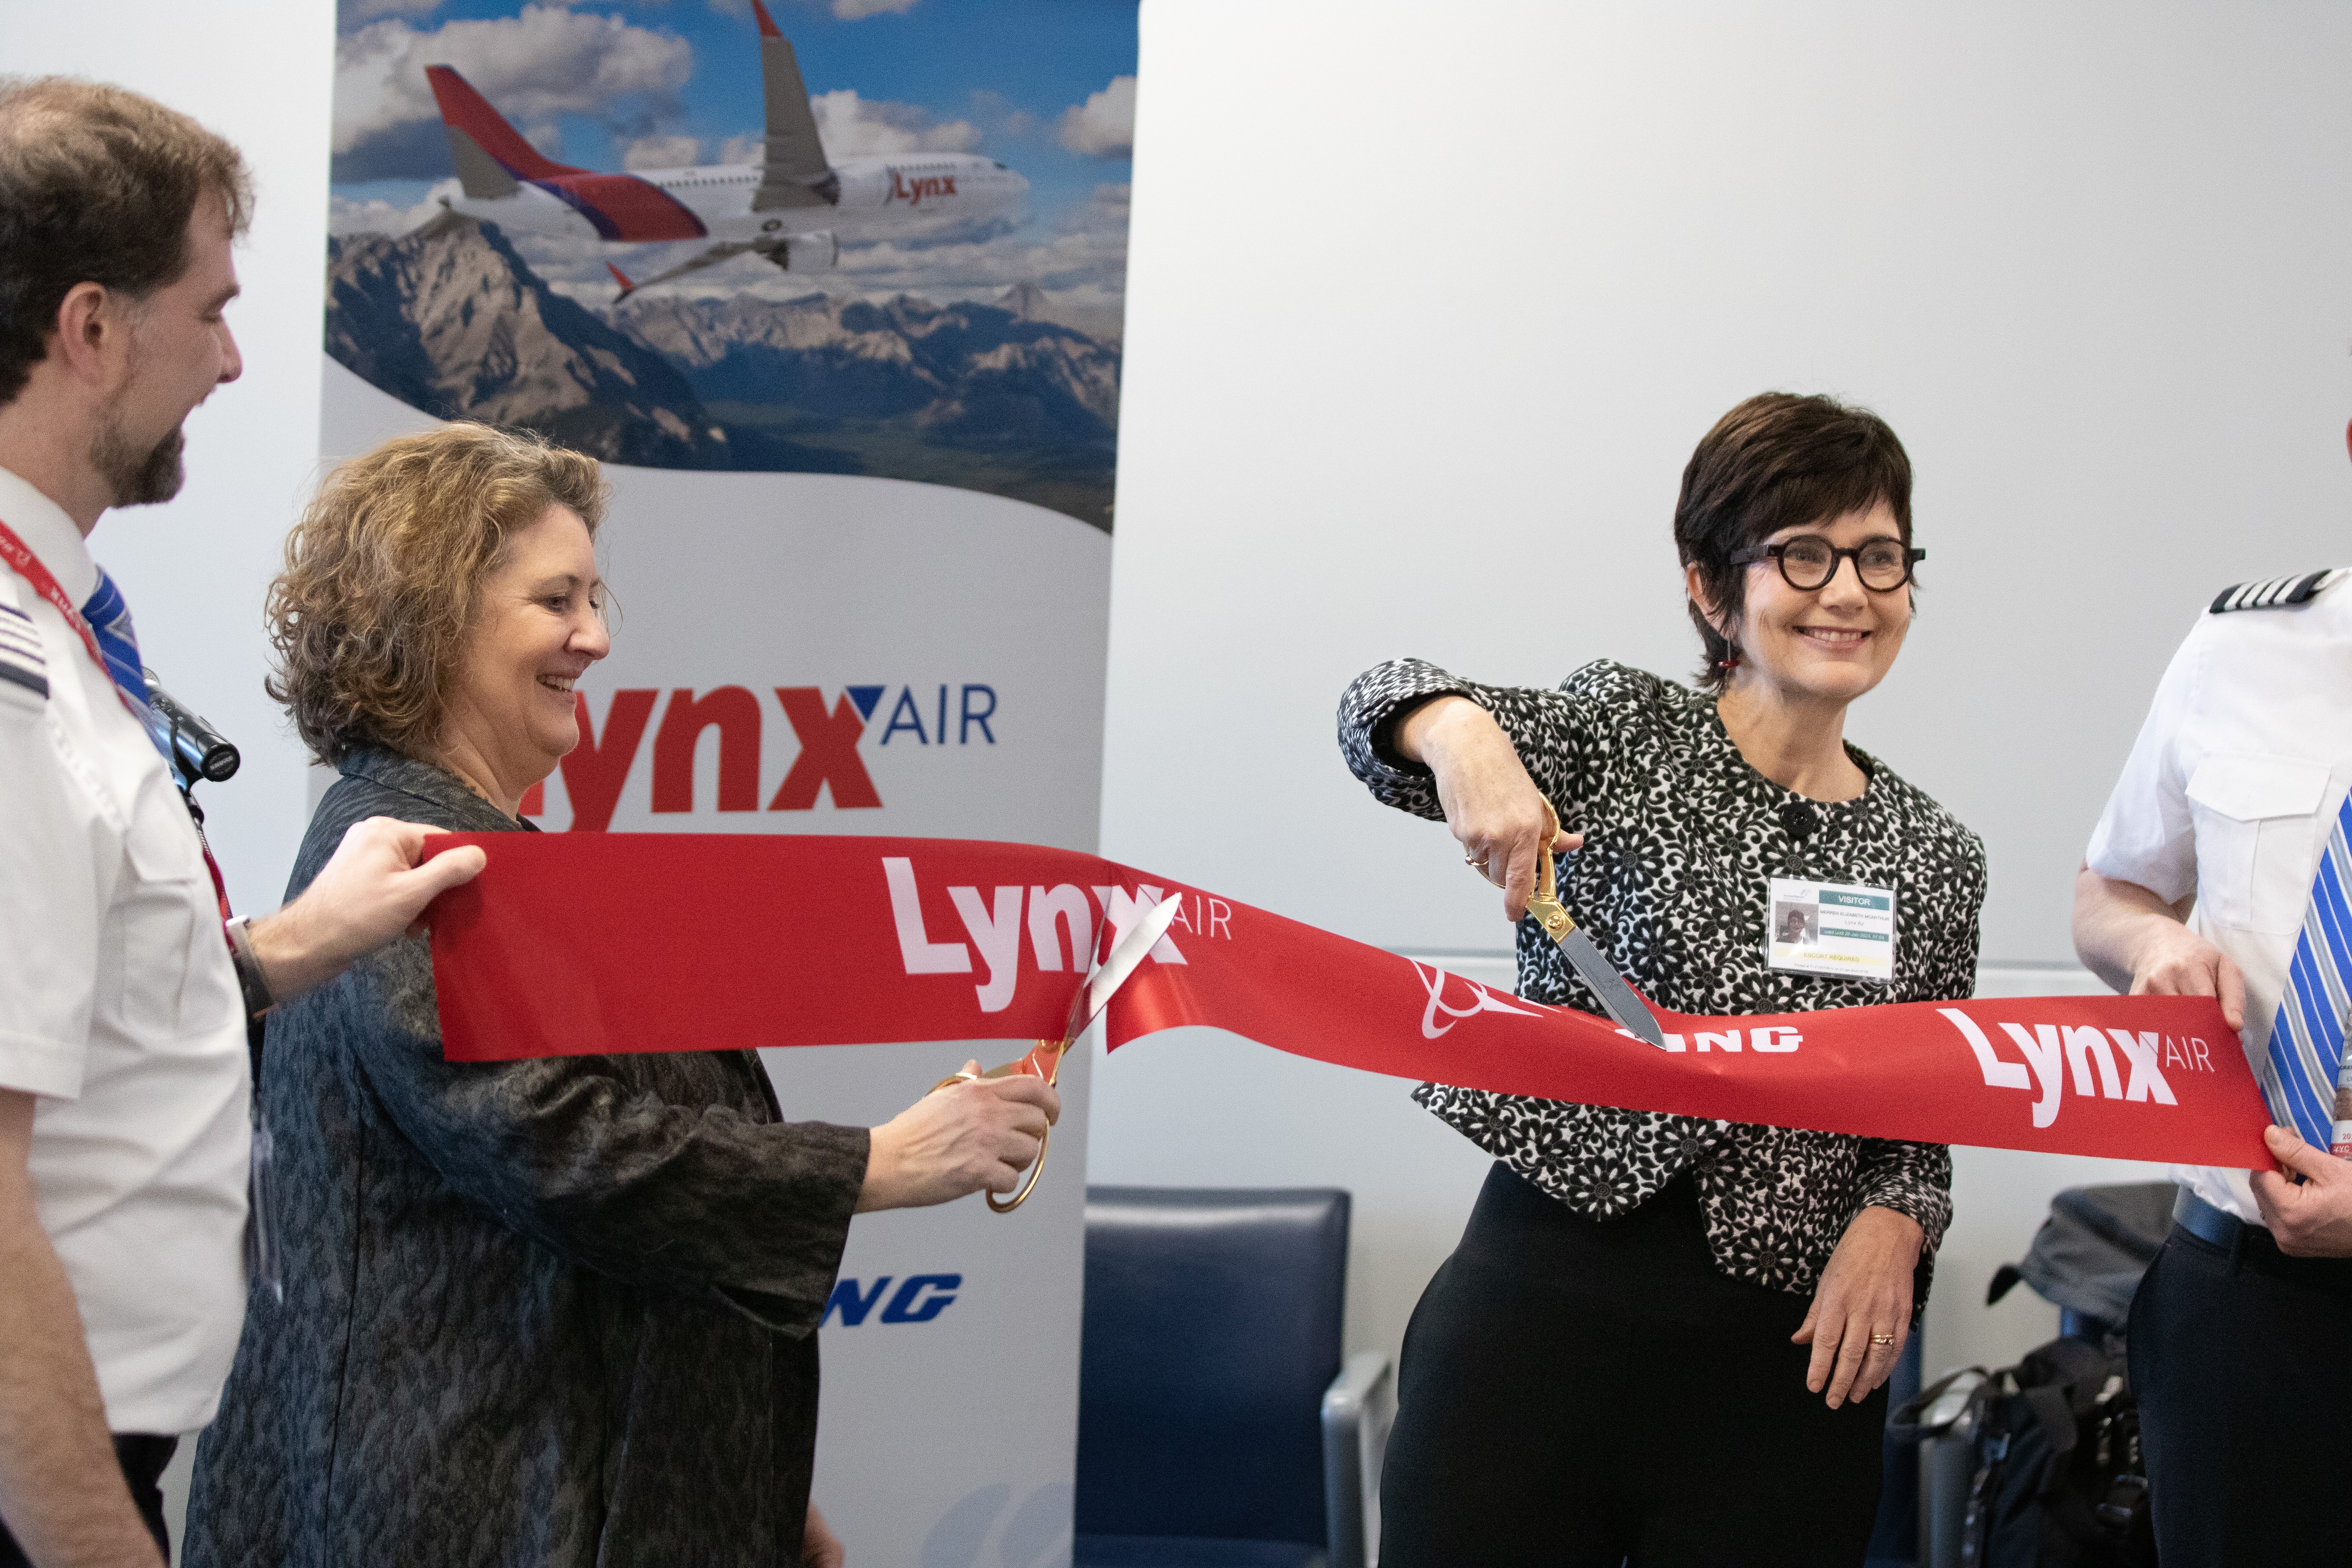 Lynx Air CEO, Merren McArthur is joined by Greater Toronto Airports Authority VP of Stakeholder Relations and Communications, Karen Mazurkewich for an official ribbon cutting celebration at Toronto Pearson Airport.